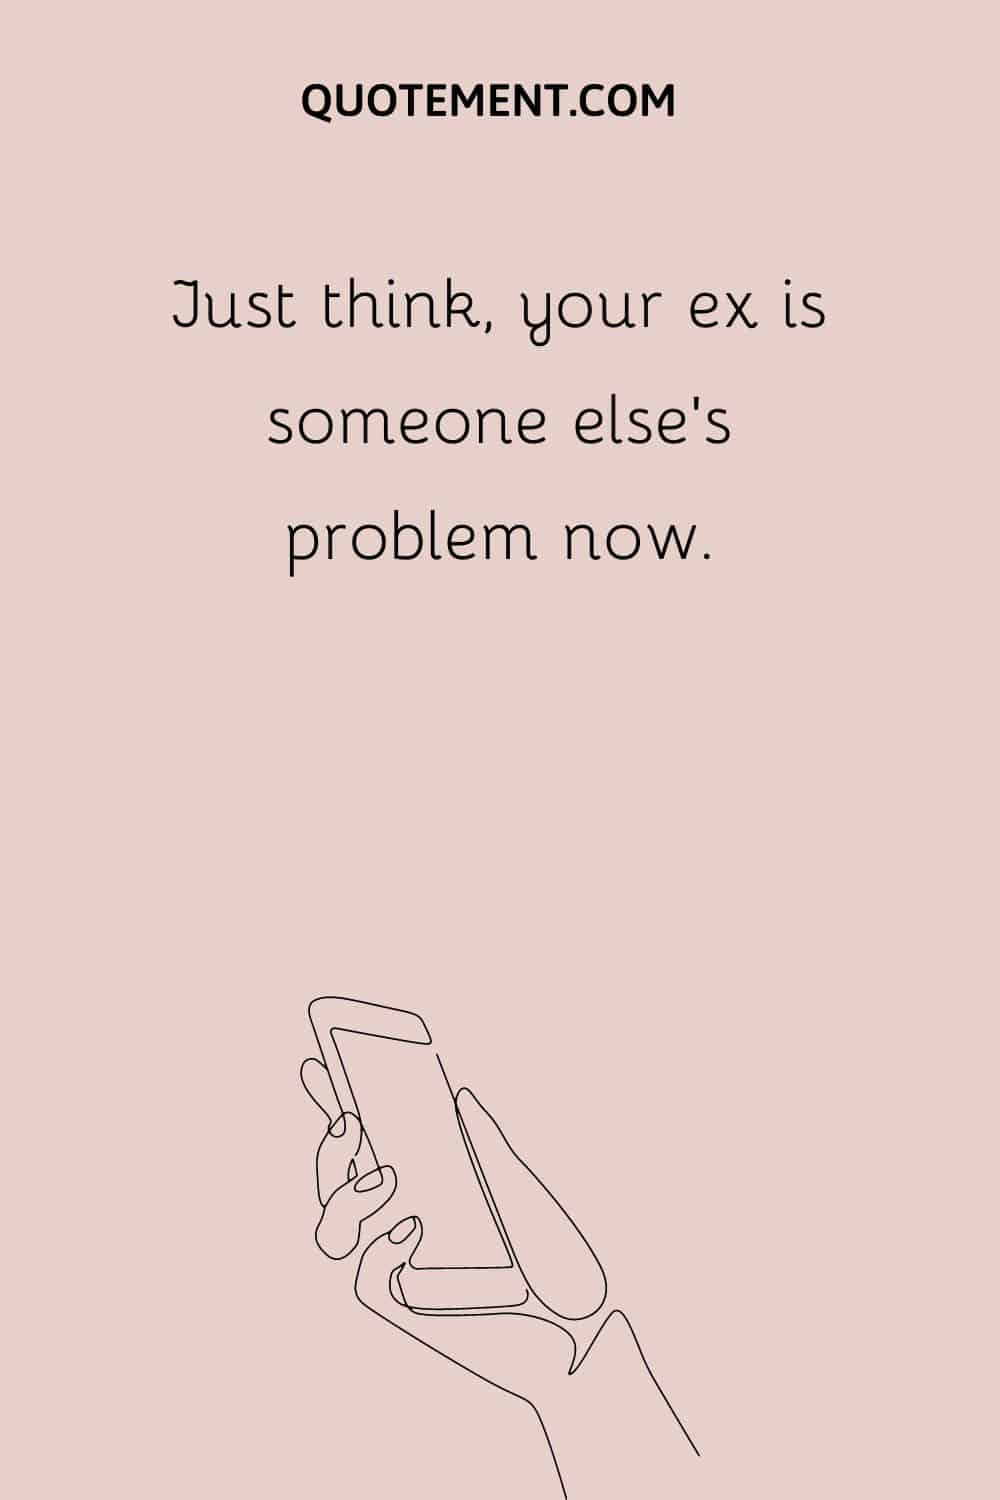 Just think, your ex is someone else’s problem now